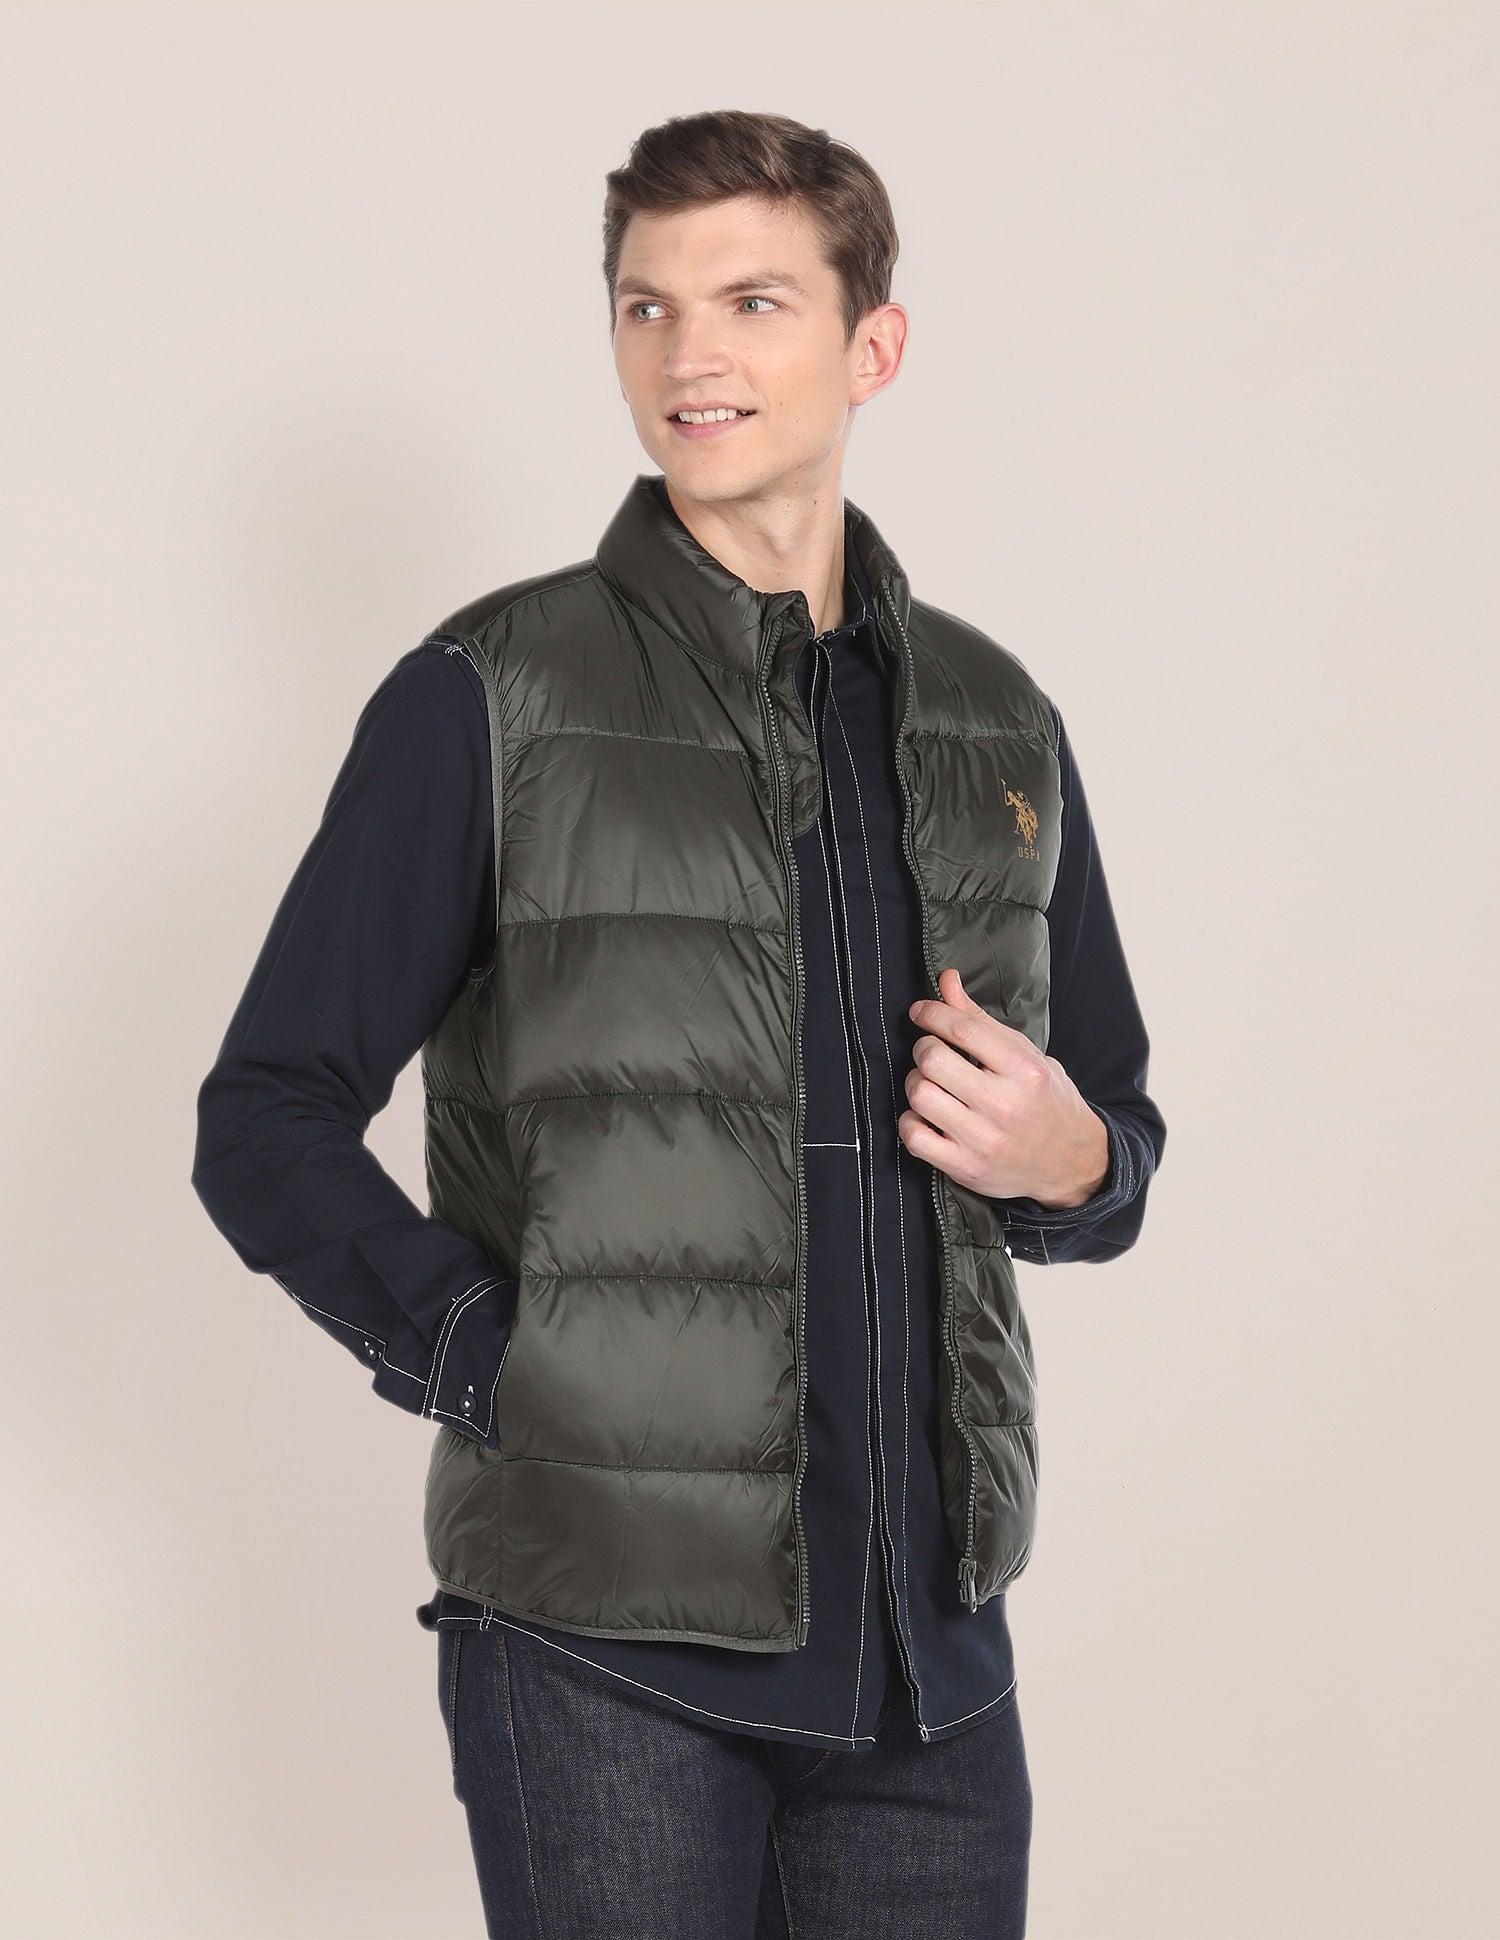 High Neck Sleeveless Quilted Jacket For Men In Olive 